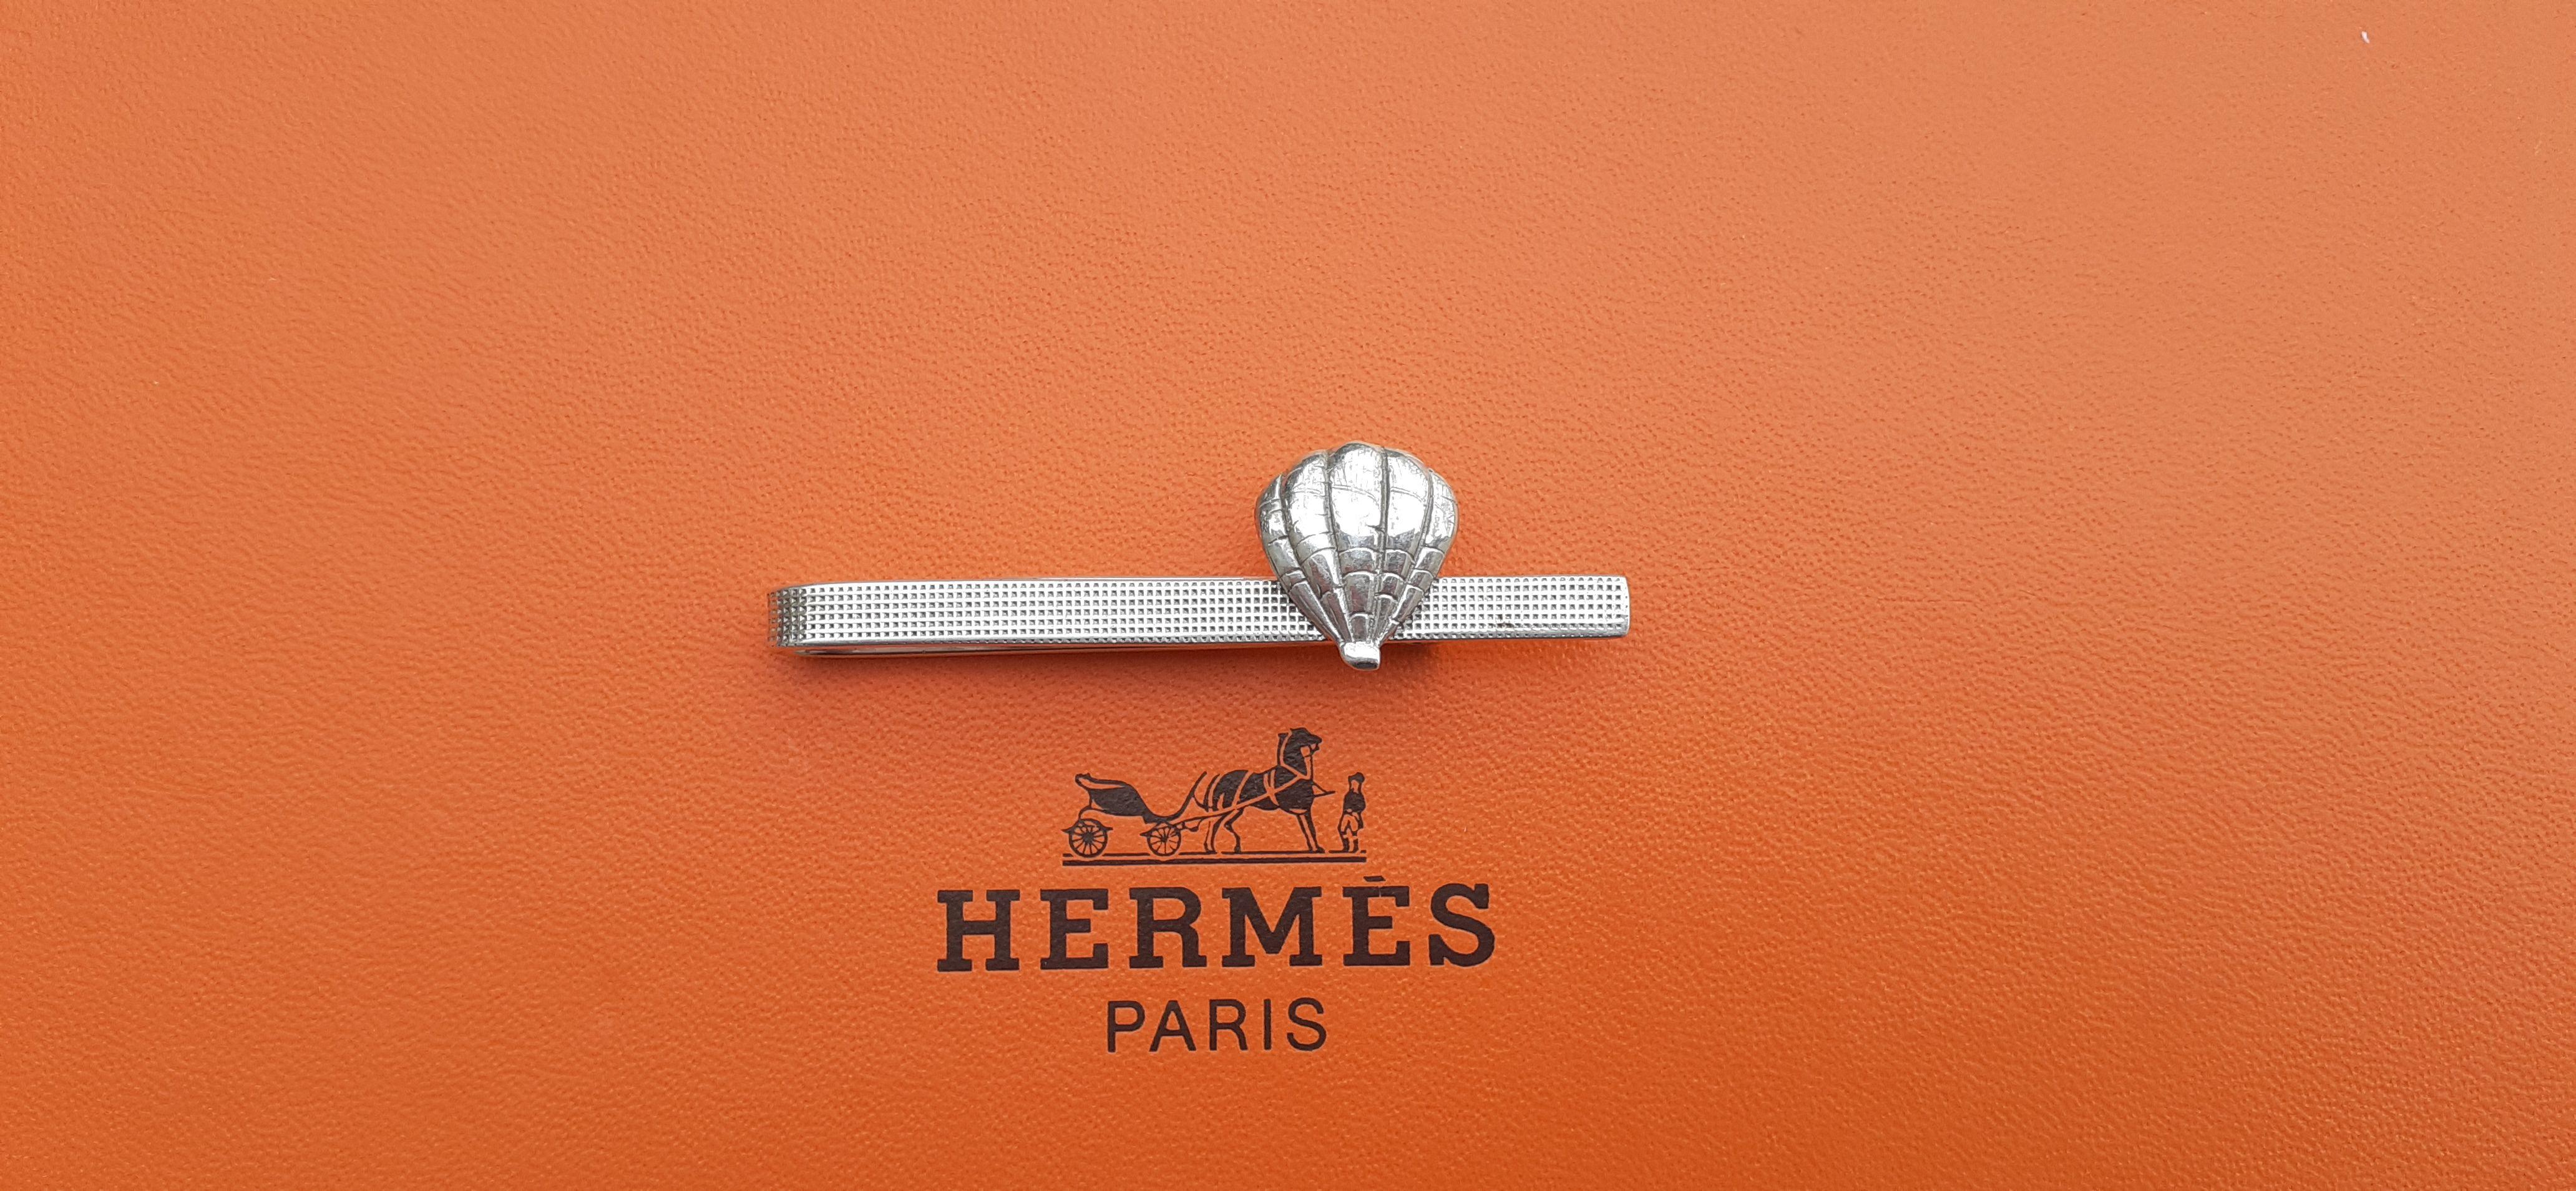 Lovely and Rare Authentic Hermès Tie Clip

In shape of a hot air balloon, or a seashell

Vintage Item

Made of Silver

